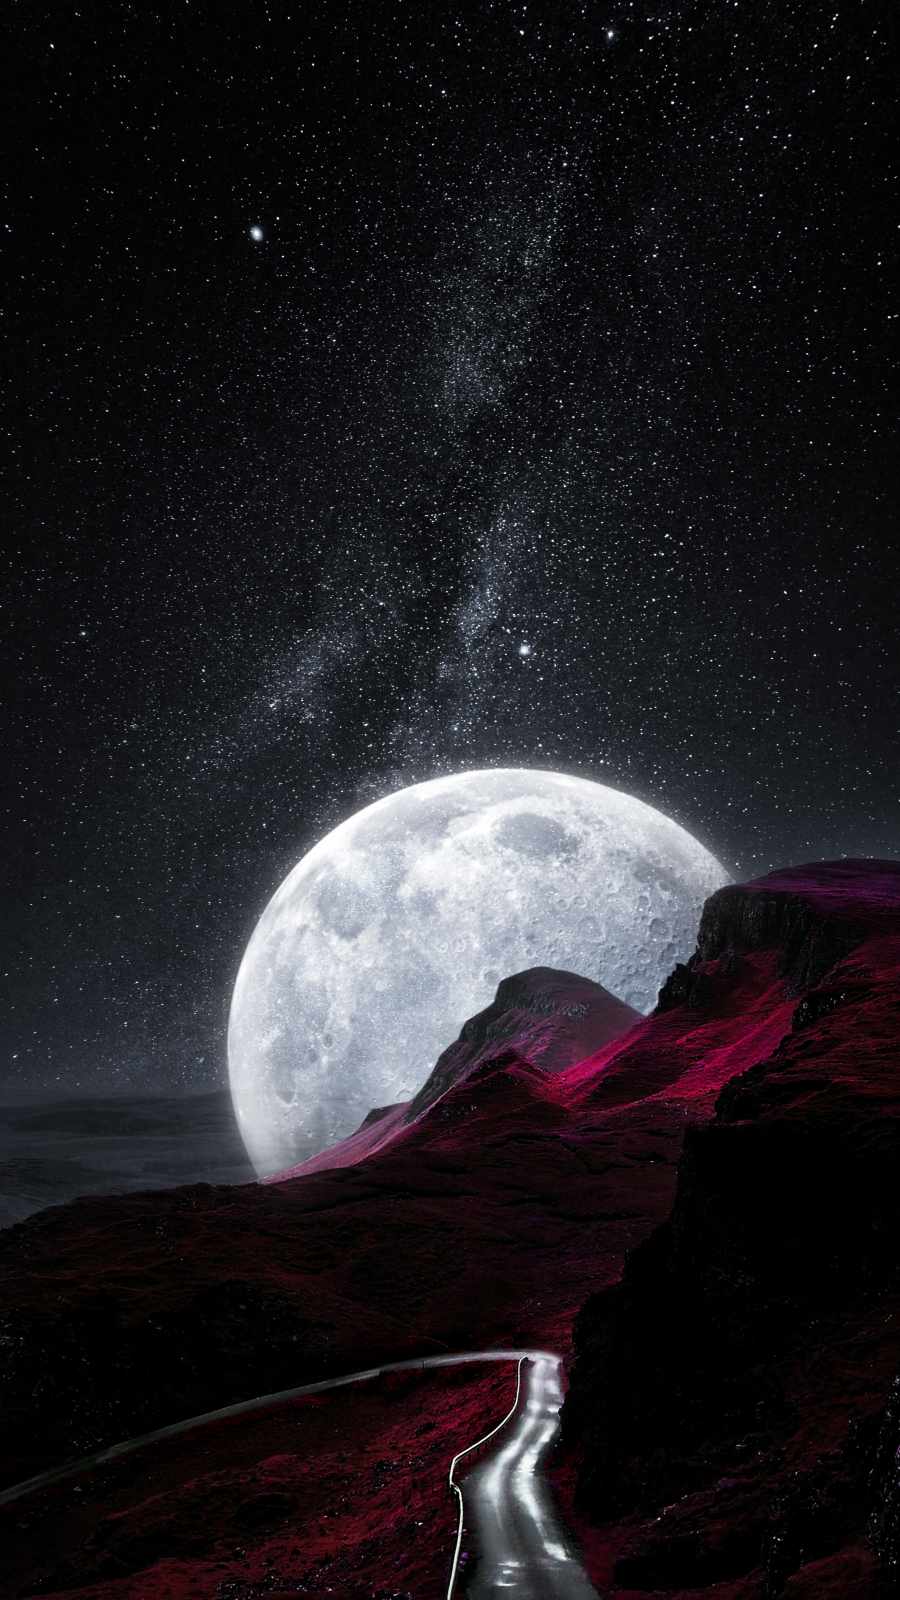 Road To Moon 4K IPhone Wallpaper - IPhone Wallpapers : iPhone Wallpapers